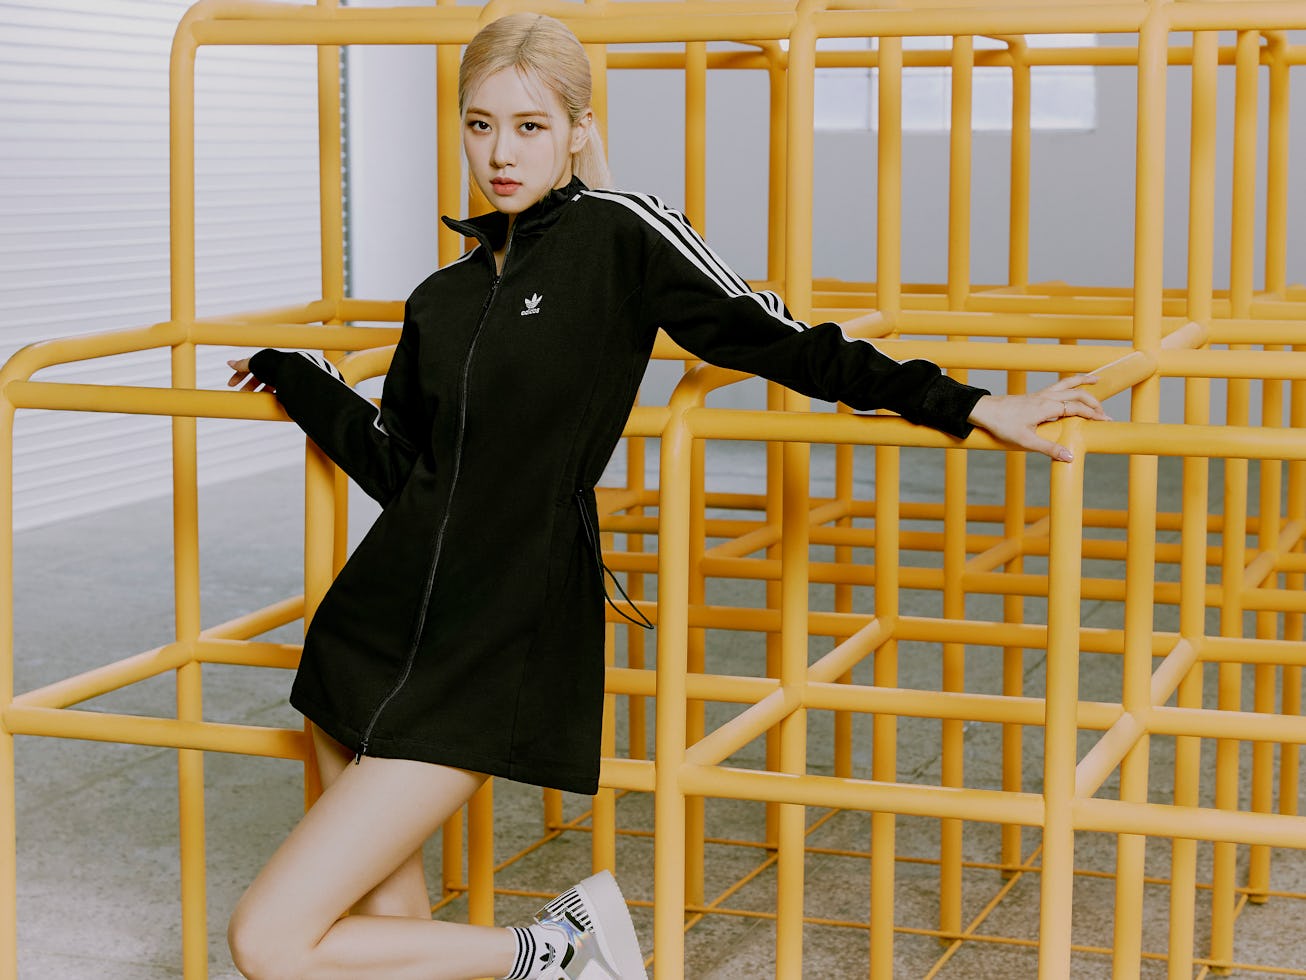 Rosé in Adidas' Watch Us Move campaign